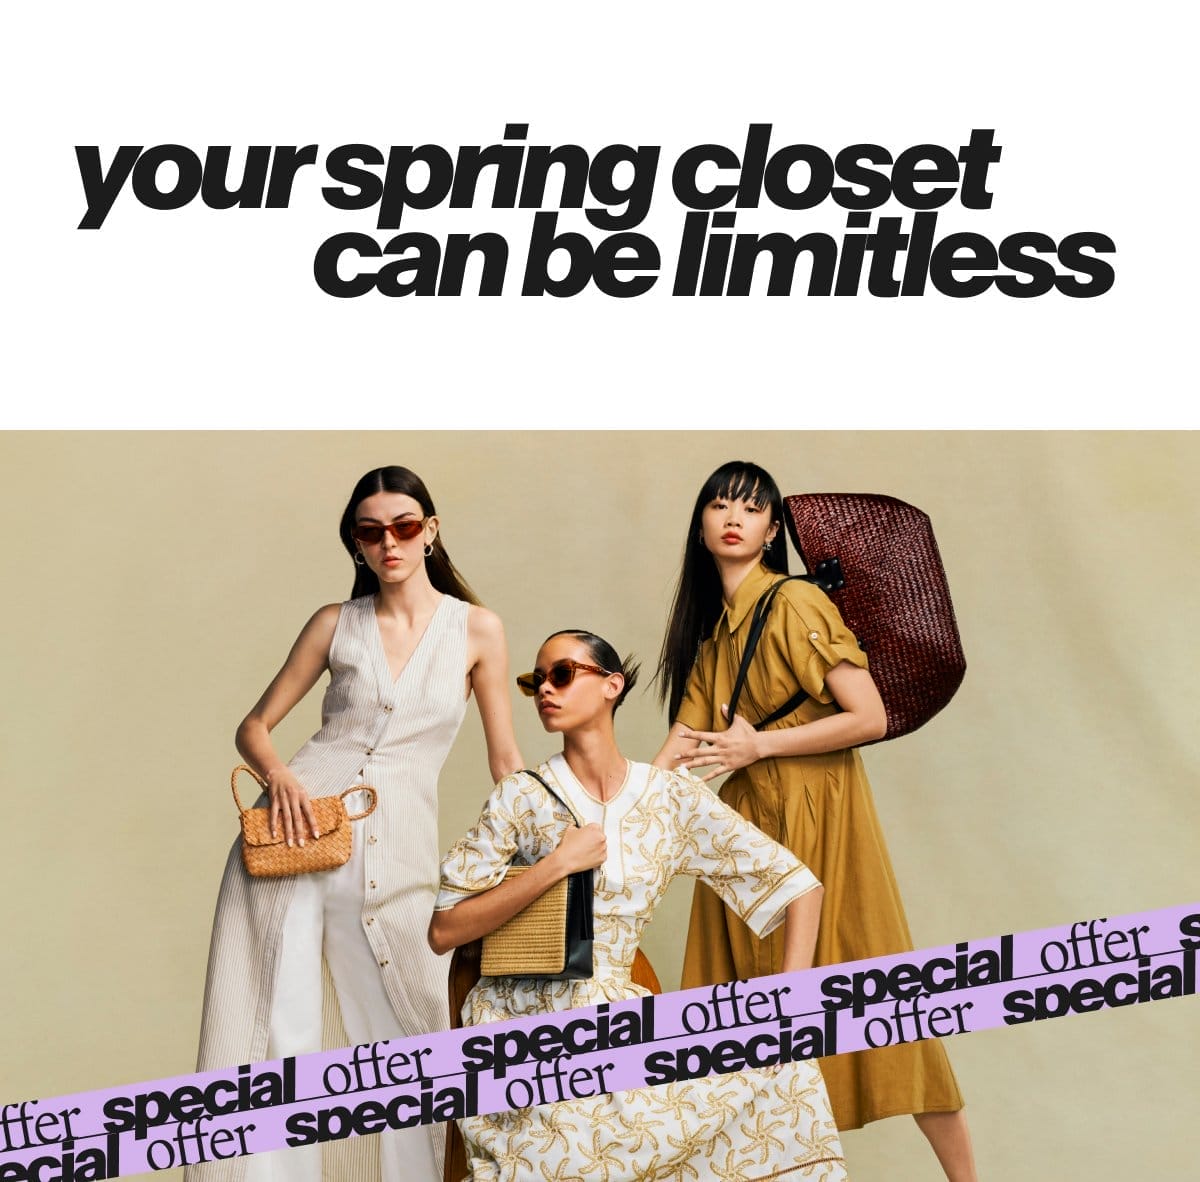 Your spring closet can be limitless